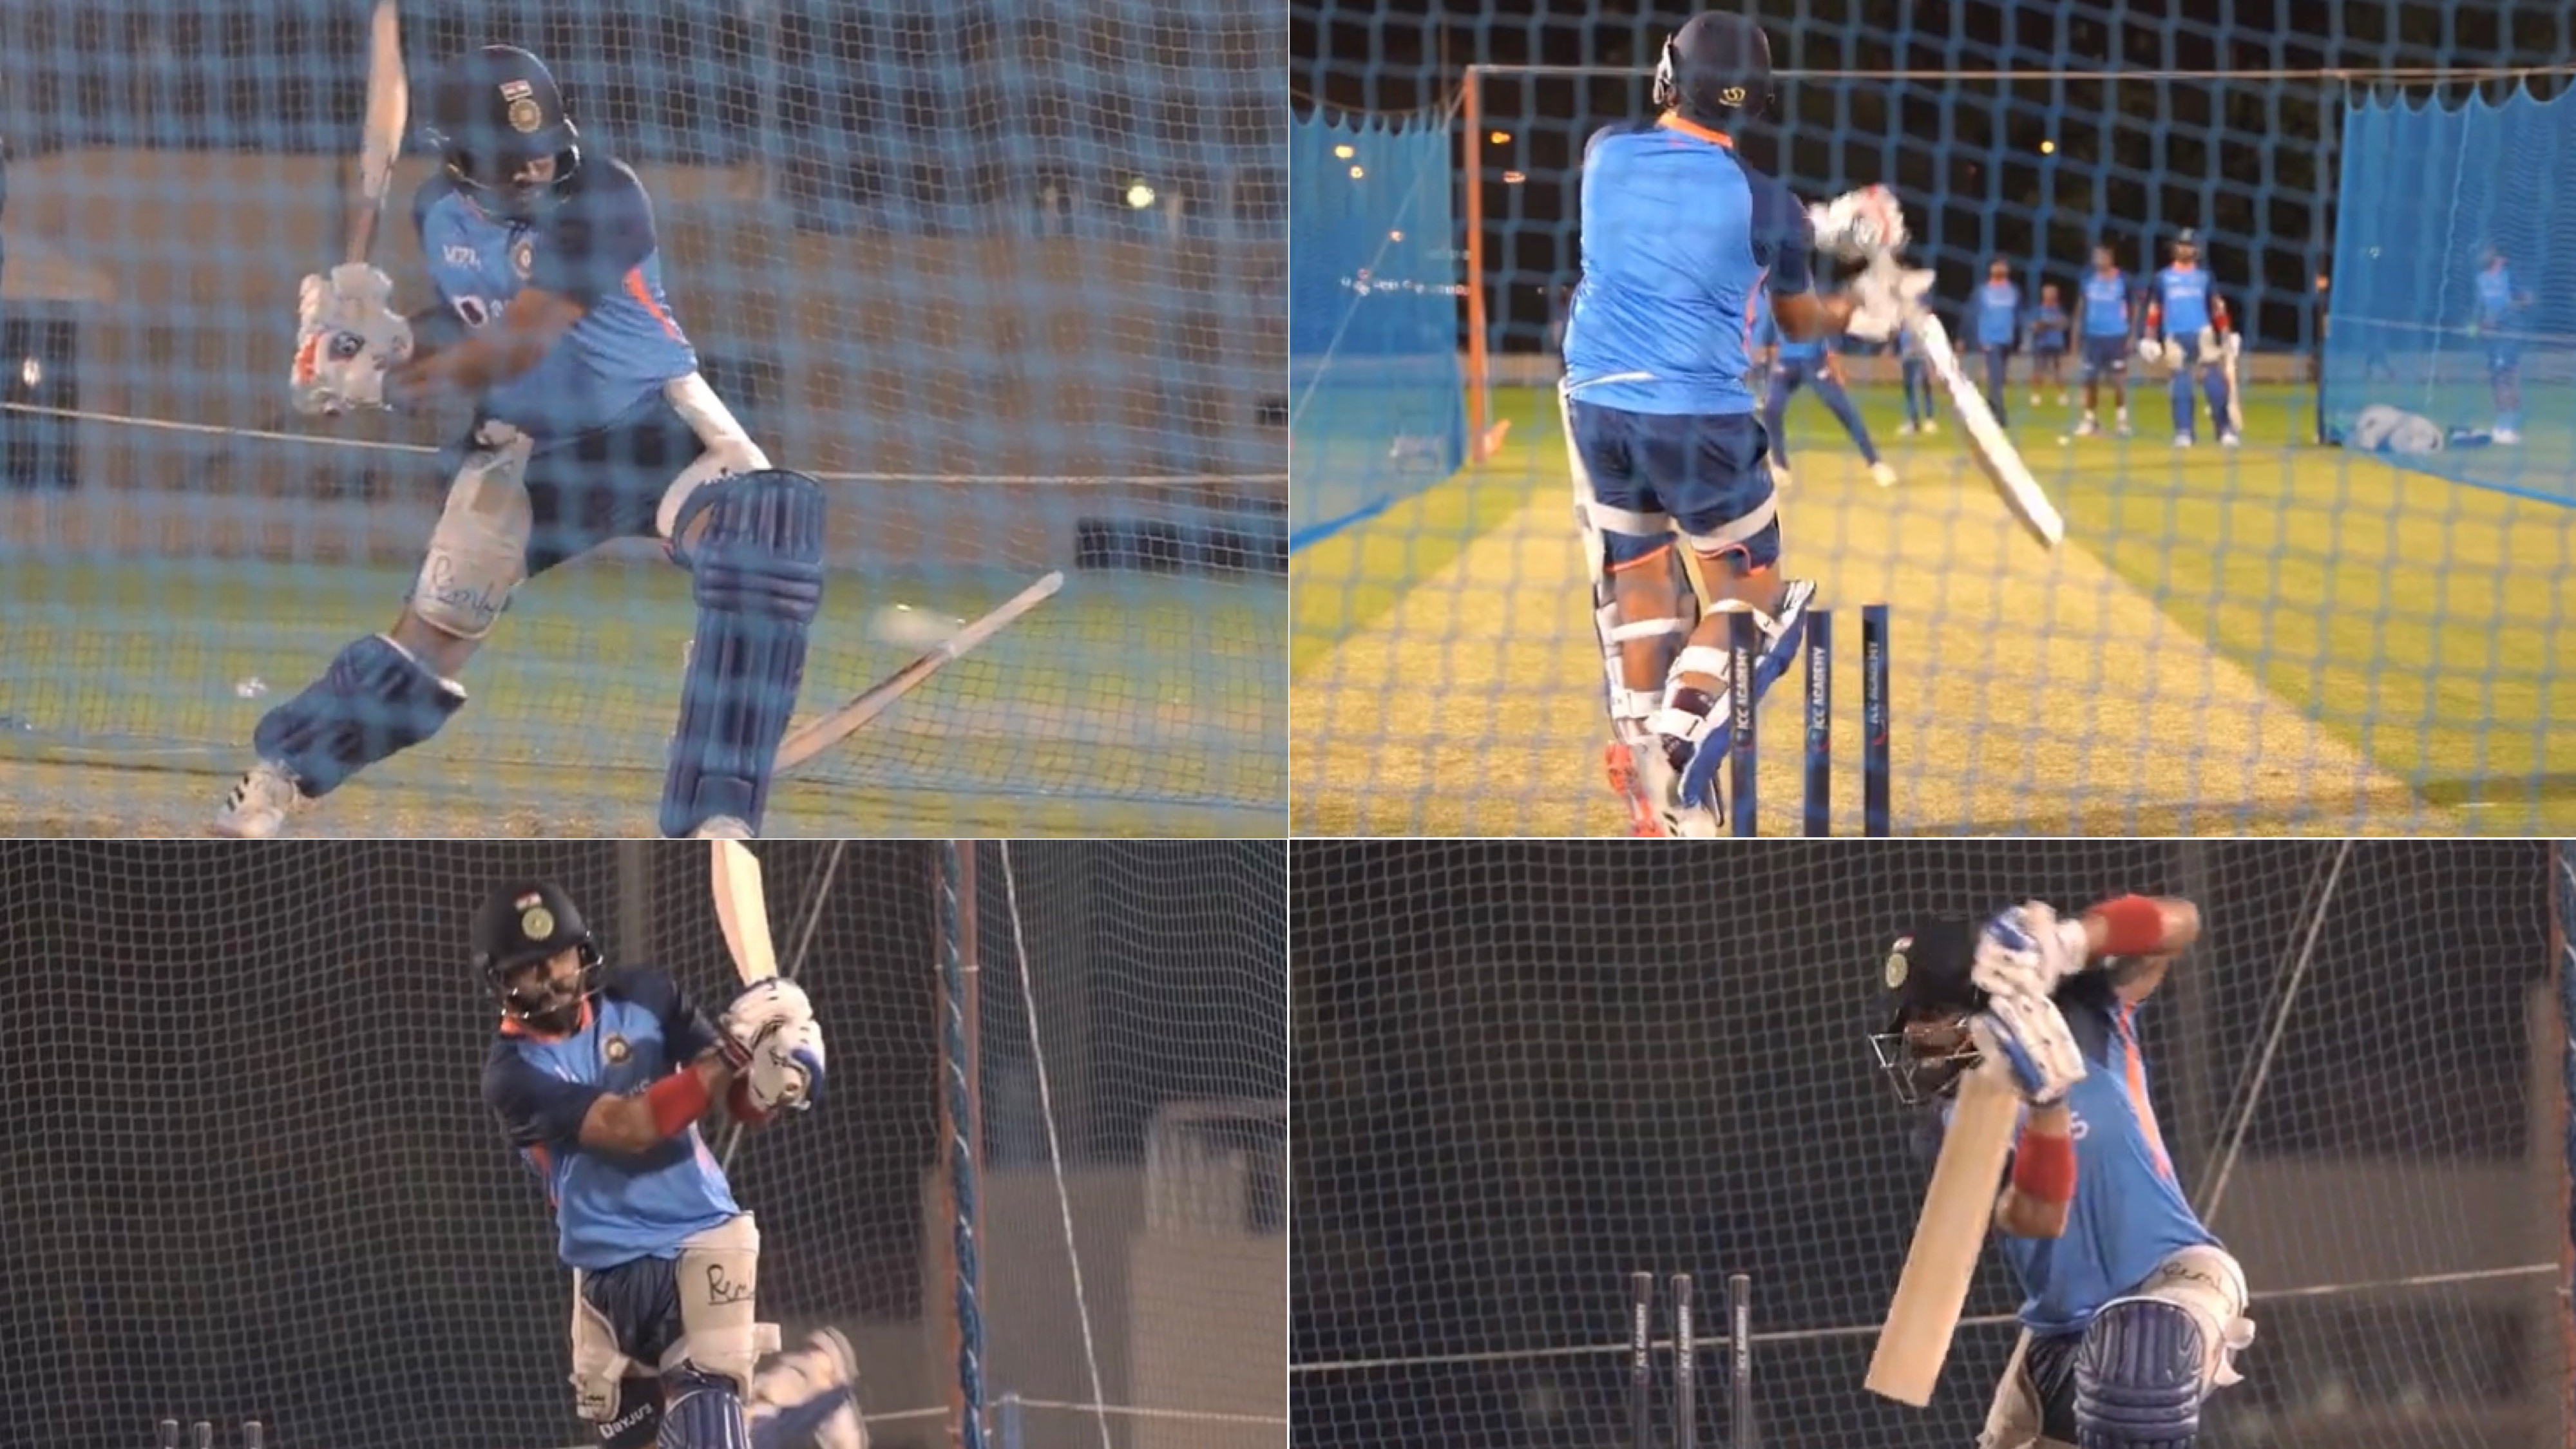 Asia Cup 2022: WATCH - Rohit Sharma and Virat Kohli send warning to Pakistan with power hitting at the nets